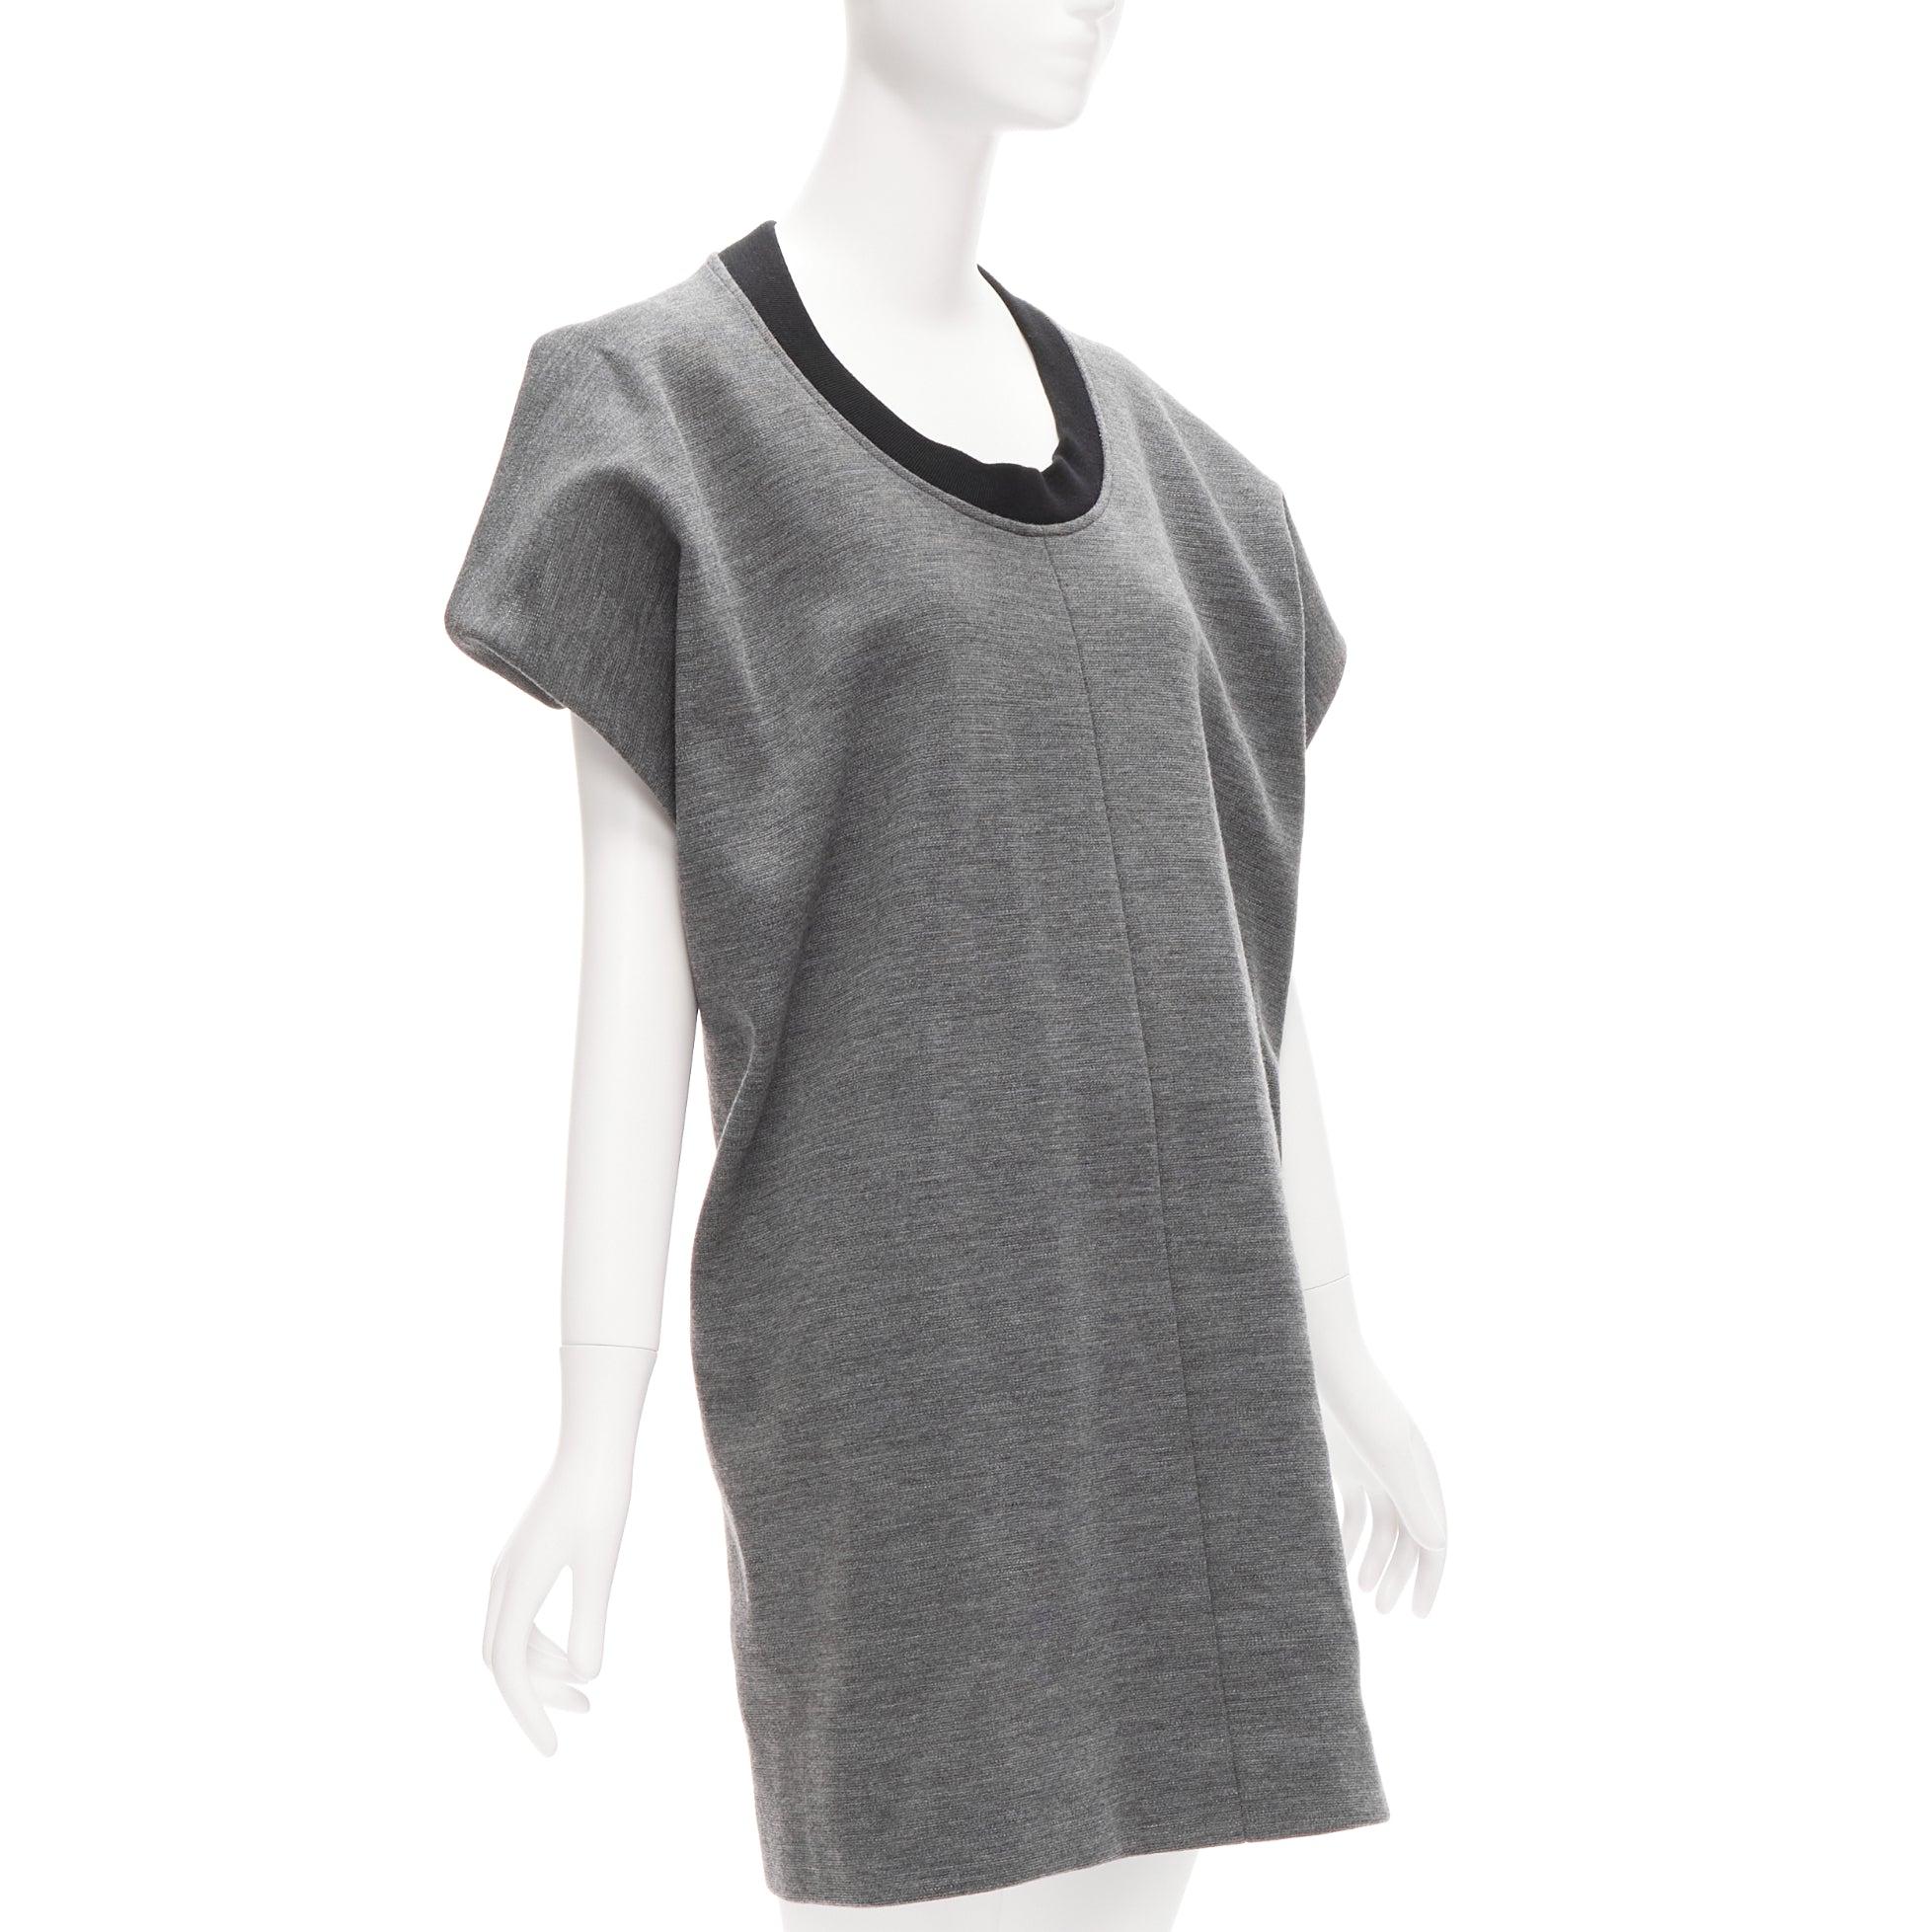 MARNI grey virgin wool blend 3D cut structured boxy casual dress IT40 S
Reference: CELG/A00296
Brand: Marni
Material: Virgin Wool, Blend
Color: Grey, Black
Pattern: Solid
Closure: Slip On
Extra Details: Back cutout detail with silver ring at